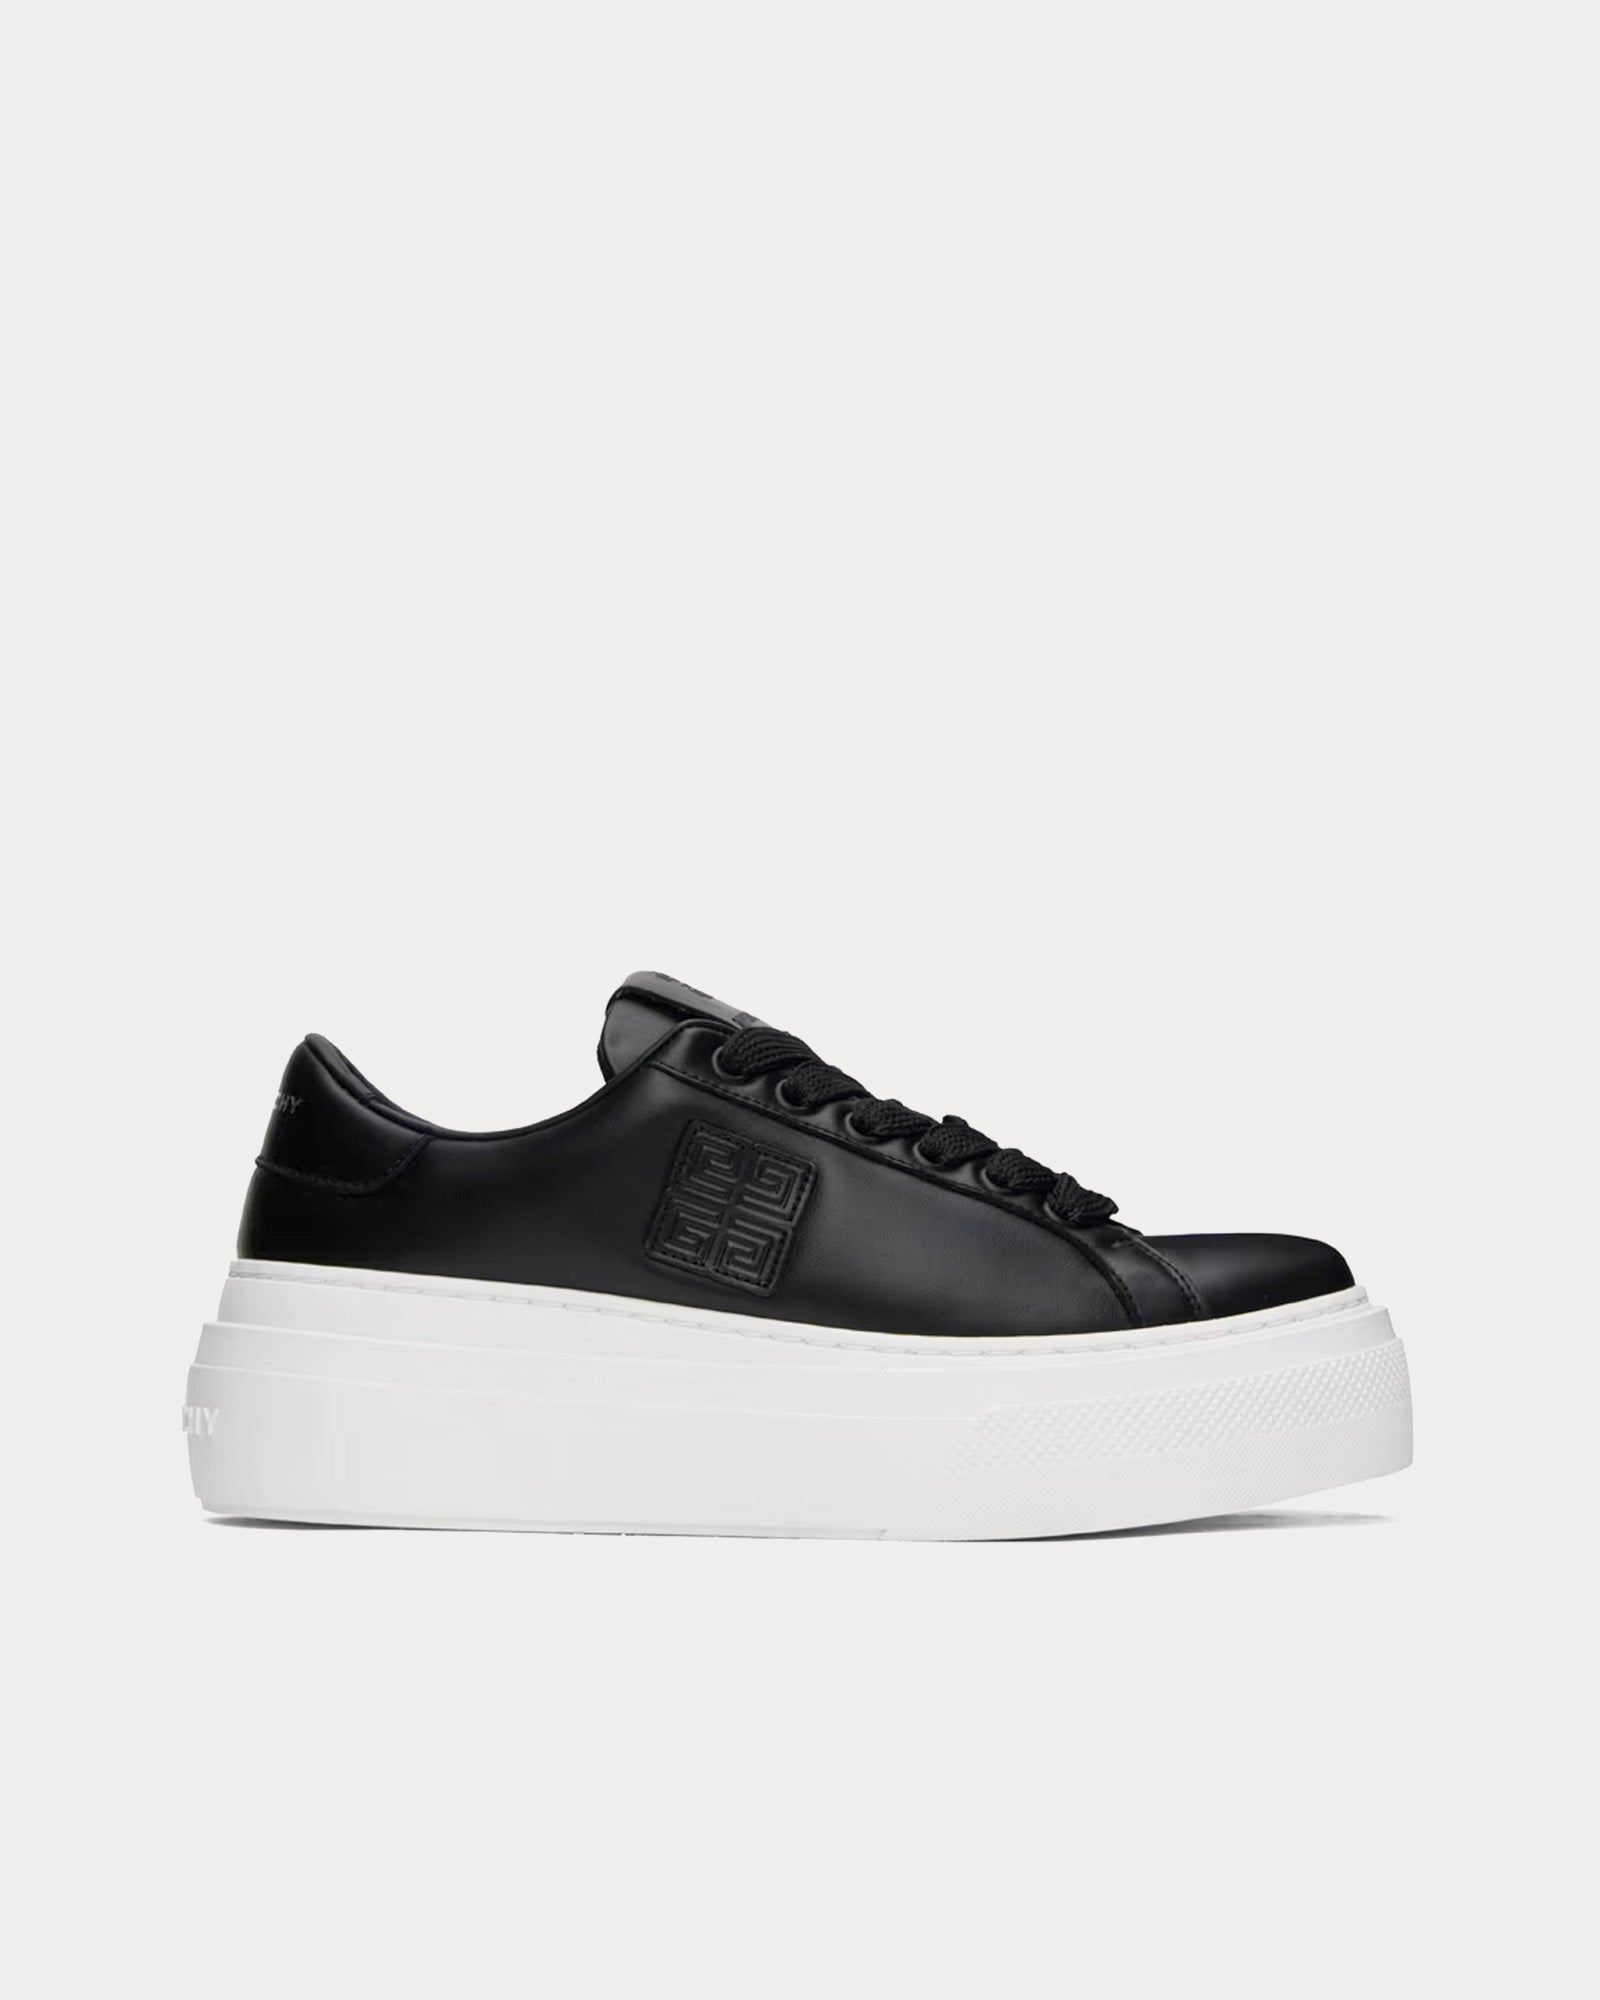 Givenchy - City Platform Leather Black / White Low Top Sneakers